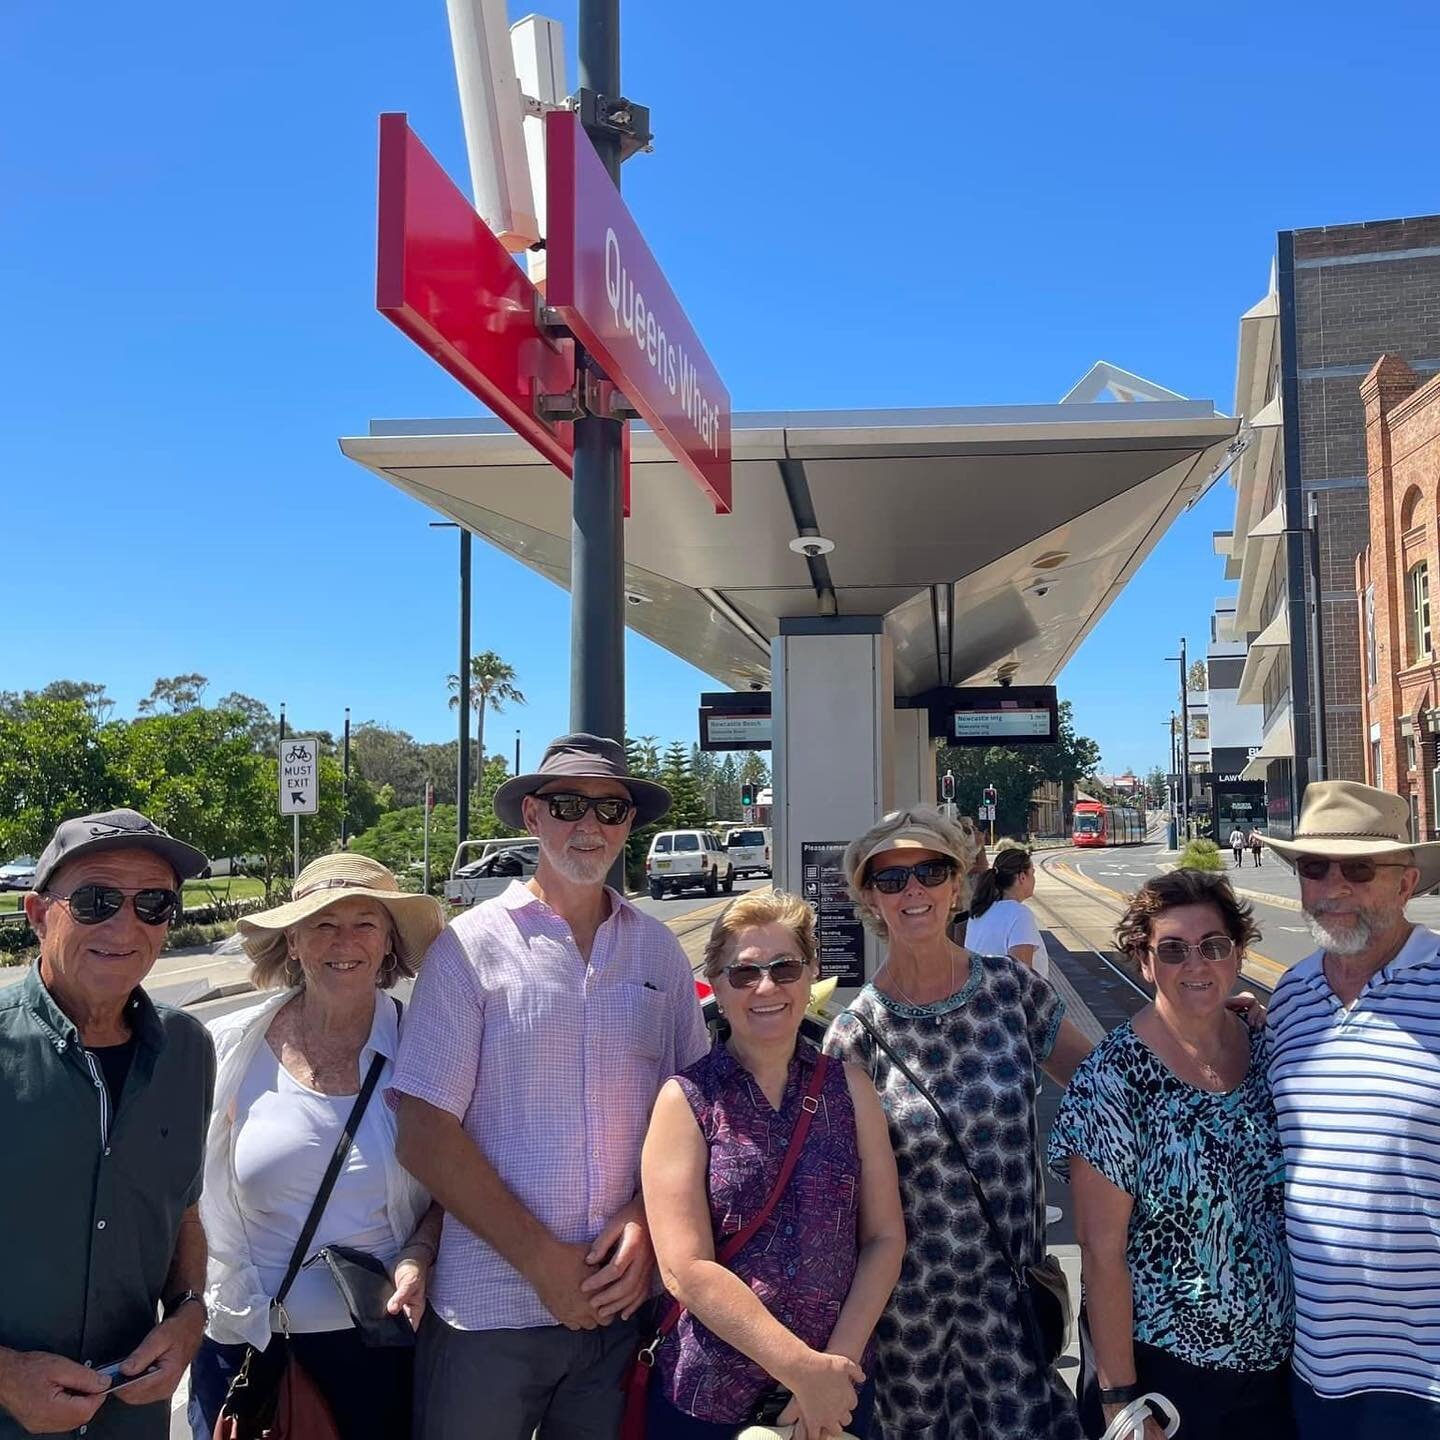 7 locals (all from the same family!) caught the light rail to Queens Wharf, found our friendly guide Matt and toured through the East End. Always lovely to hear some old tales and share the new. Thanks gang, that was awesome ☀️😎🙏🏽